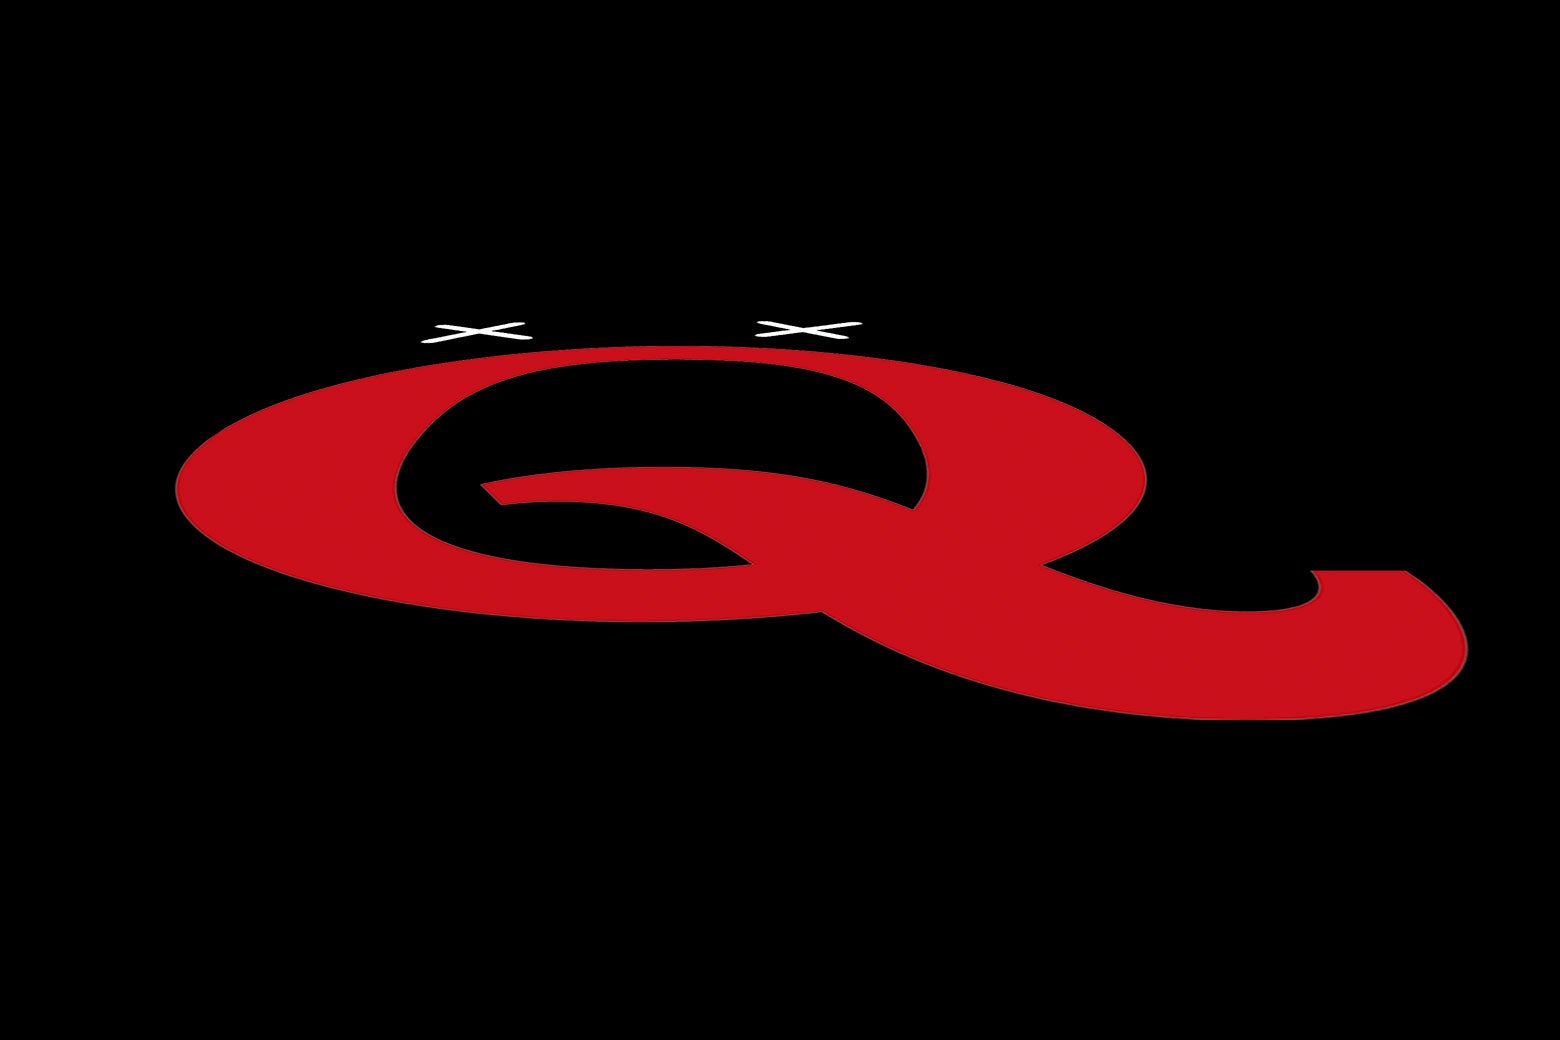 A dead Quora Q logo against a black background, with white X's for eyes.